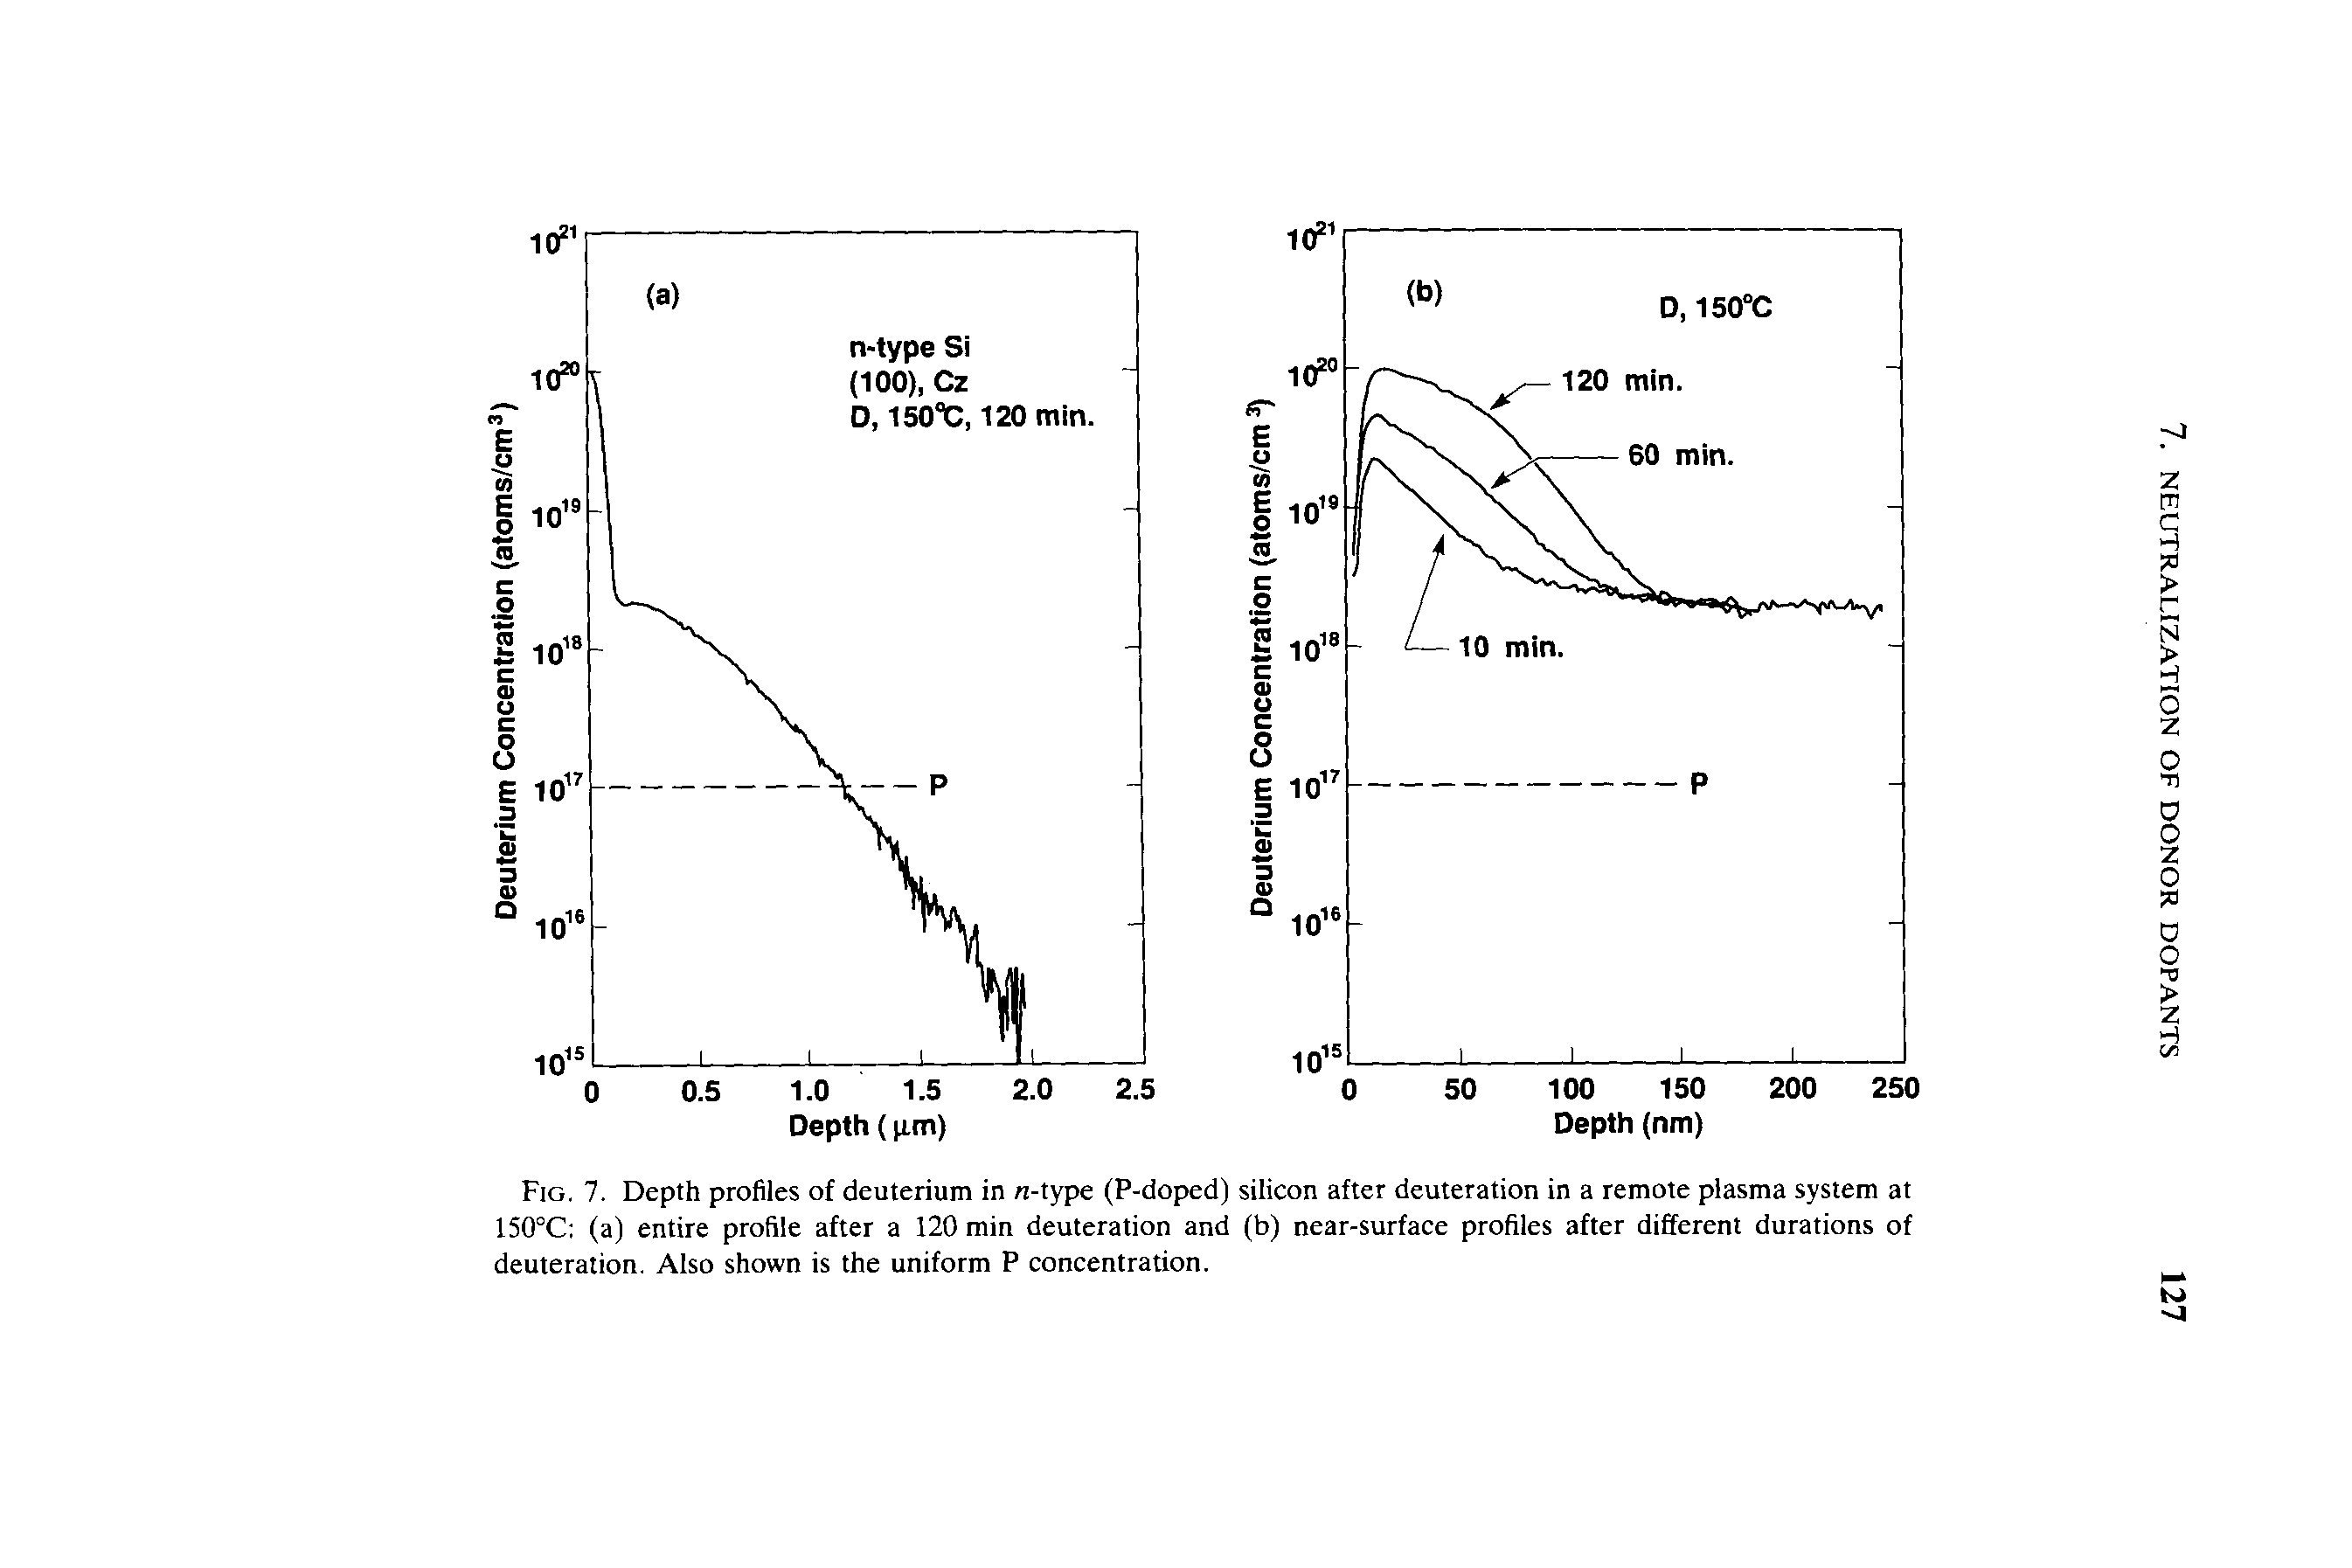 Fig. 7. Depth profiles of deuterium in n-type (P-doped) silicon after deuteration in a remote plasma system at 150°C (a) entire profile after a 120 min deuteration and (b) near-surface profiles after different durations of deuteration. Also shown is the uniform P concentration.